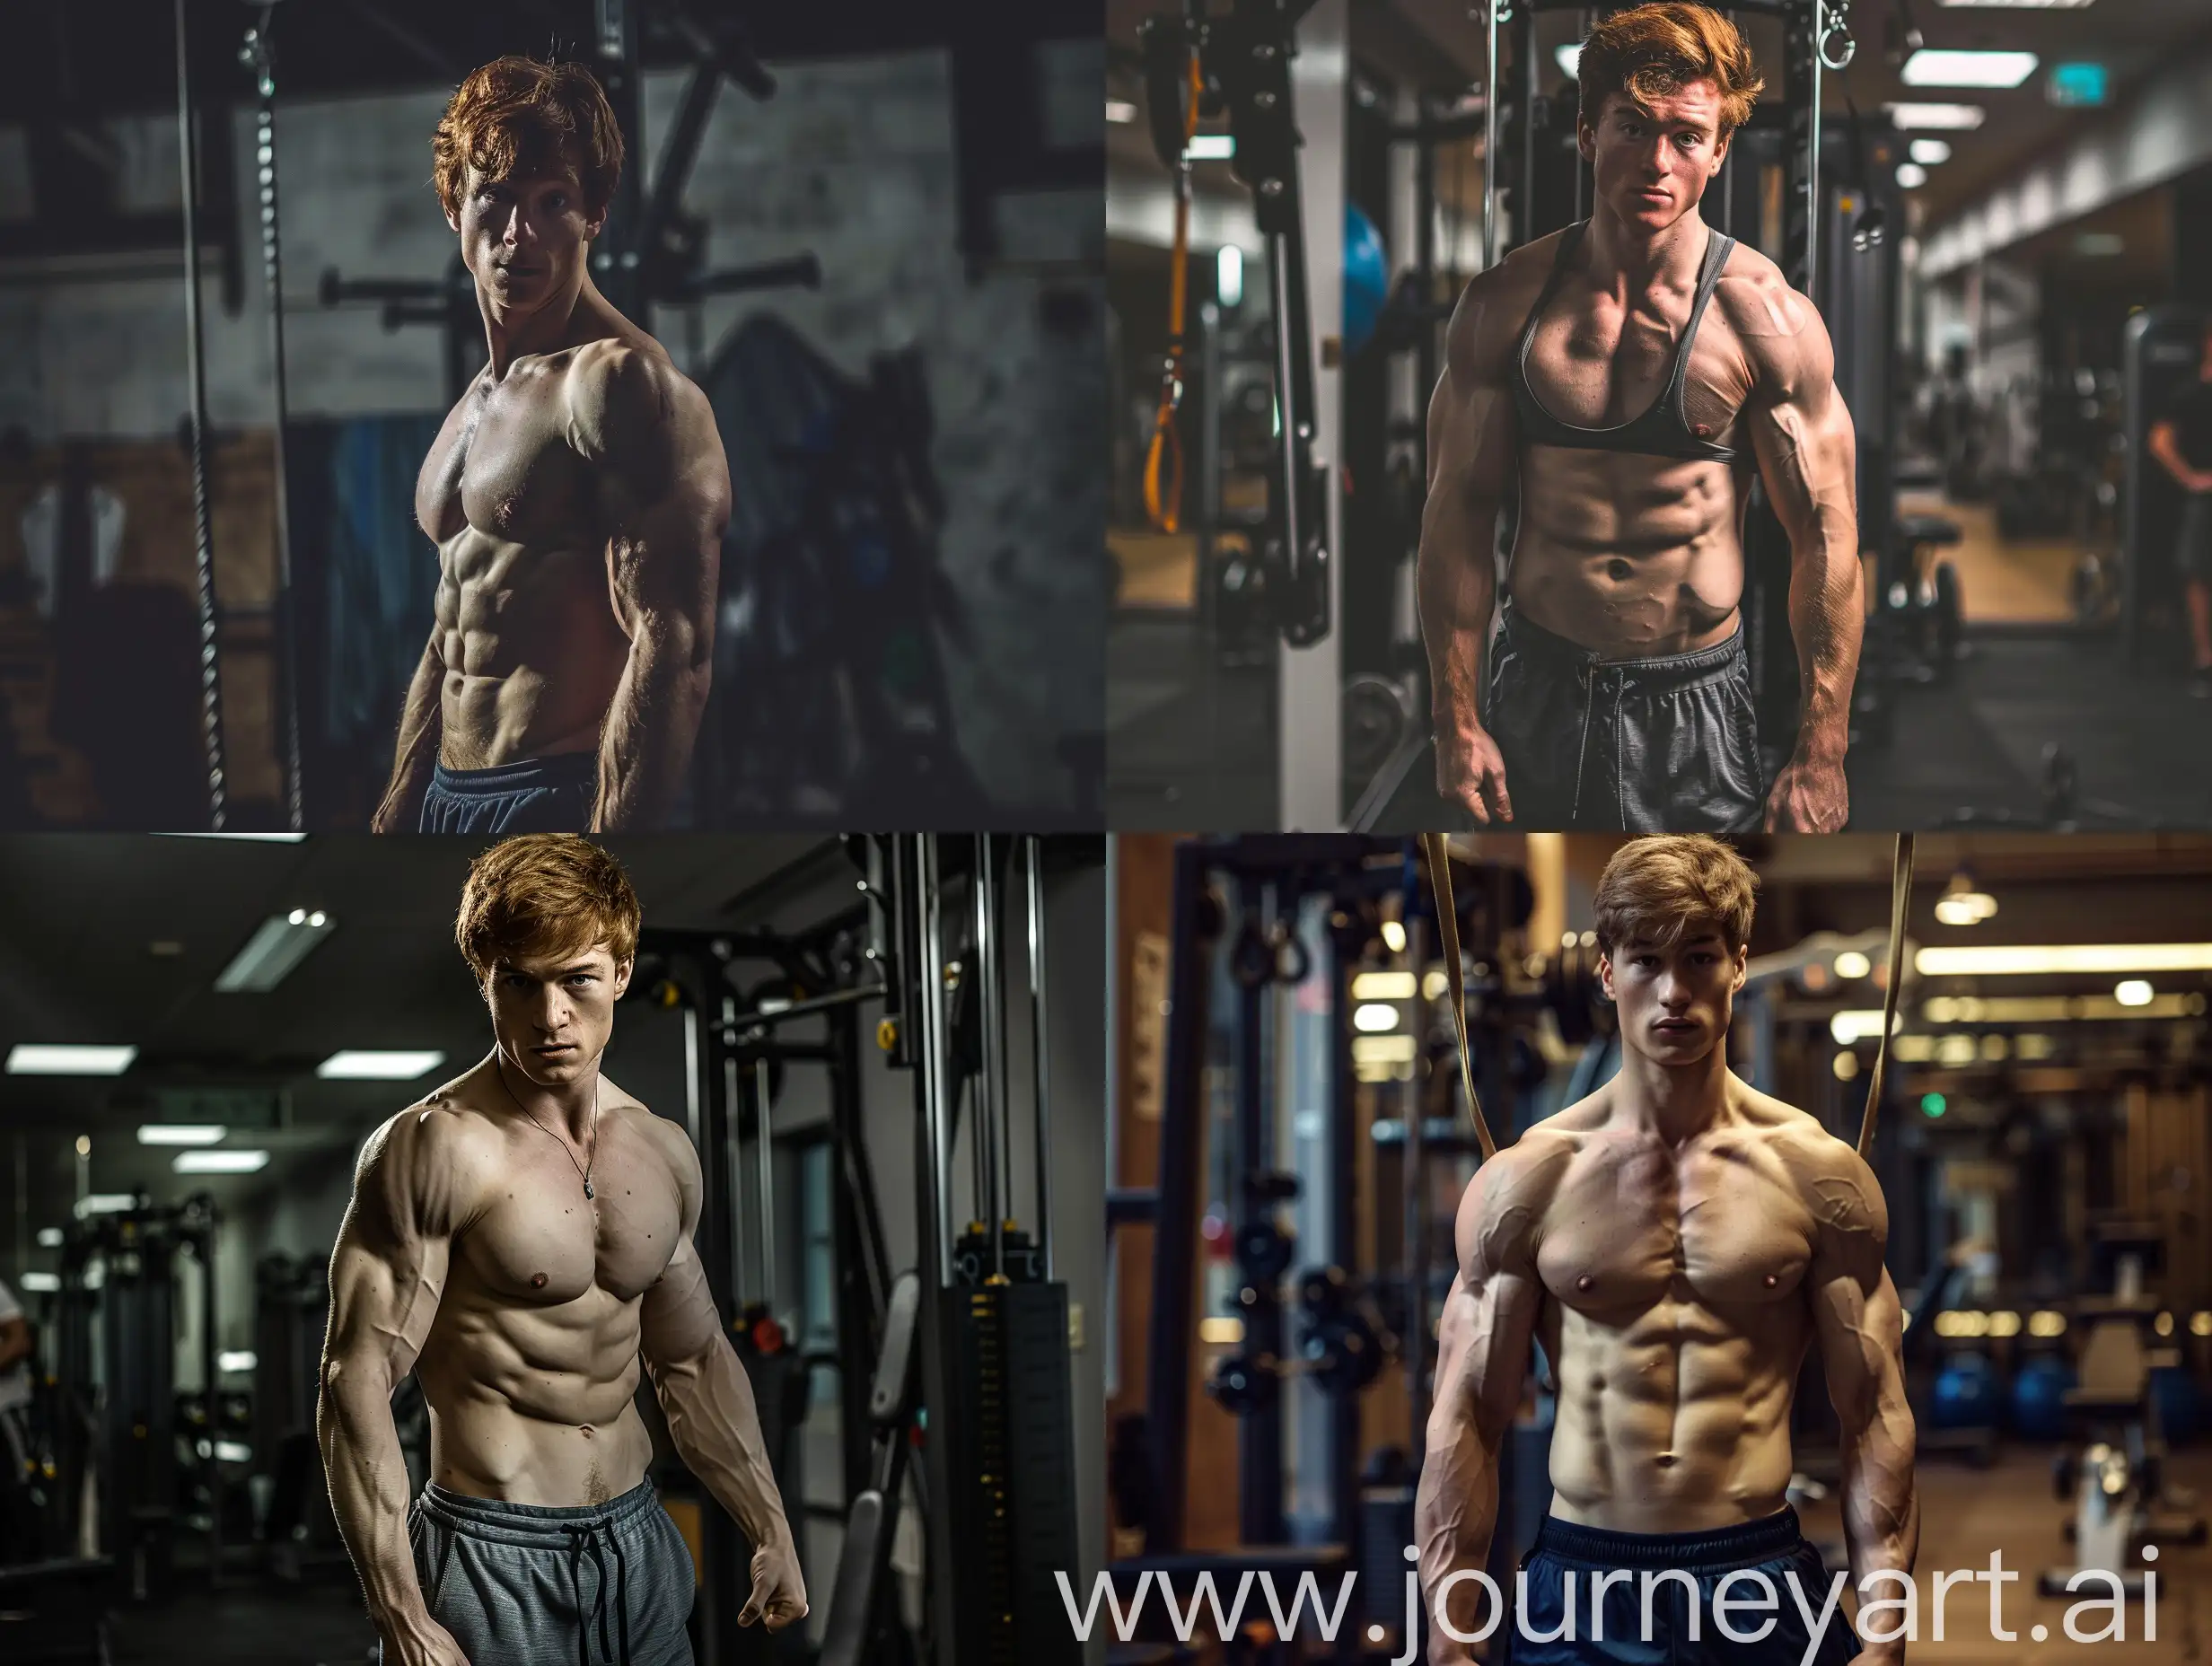 Percy-Weasley-Workout-Session-in-Wizard-Gym-Harry-Potter-Movie-Character